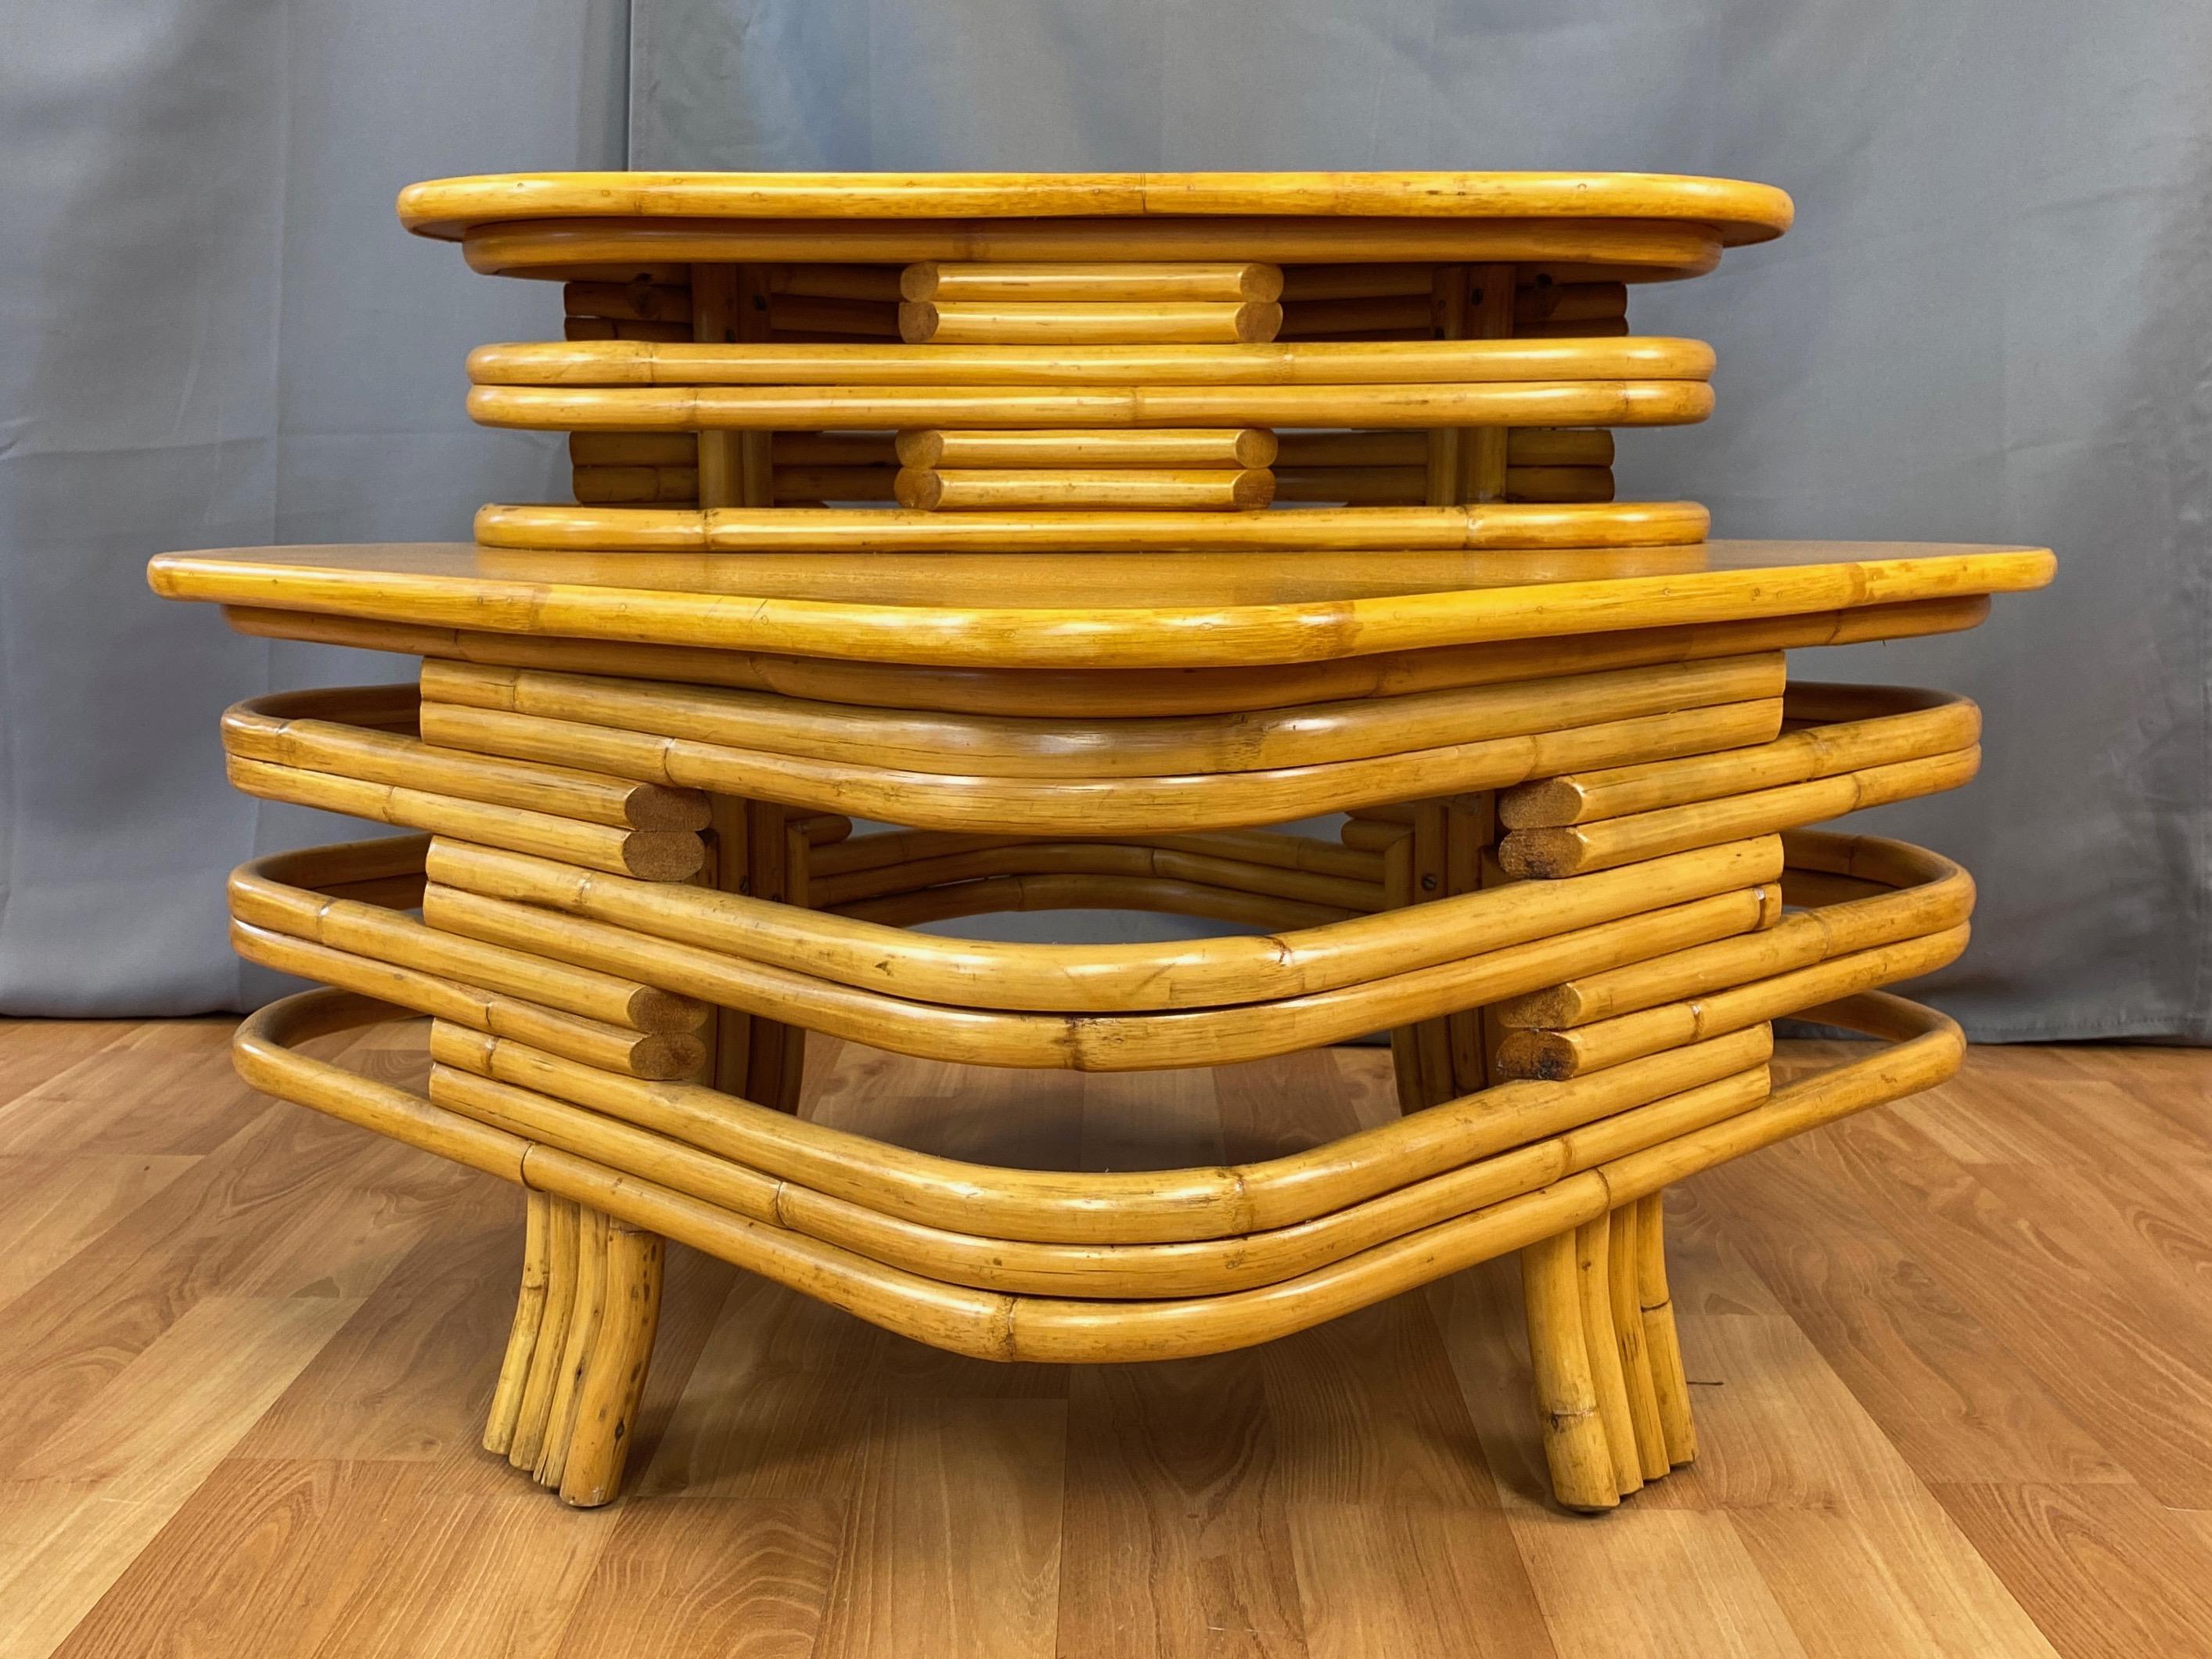 A very handsome mid-century Paul Frankl-style rattan and mahogany two-tier corner table by Tropical Sun Co. of Pasadena, California.

Expertly-crafted bent rattan stacked with alternating openings that give the curvaceous square form a substantial